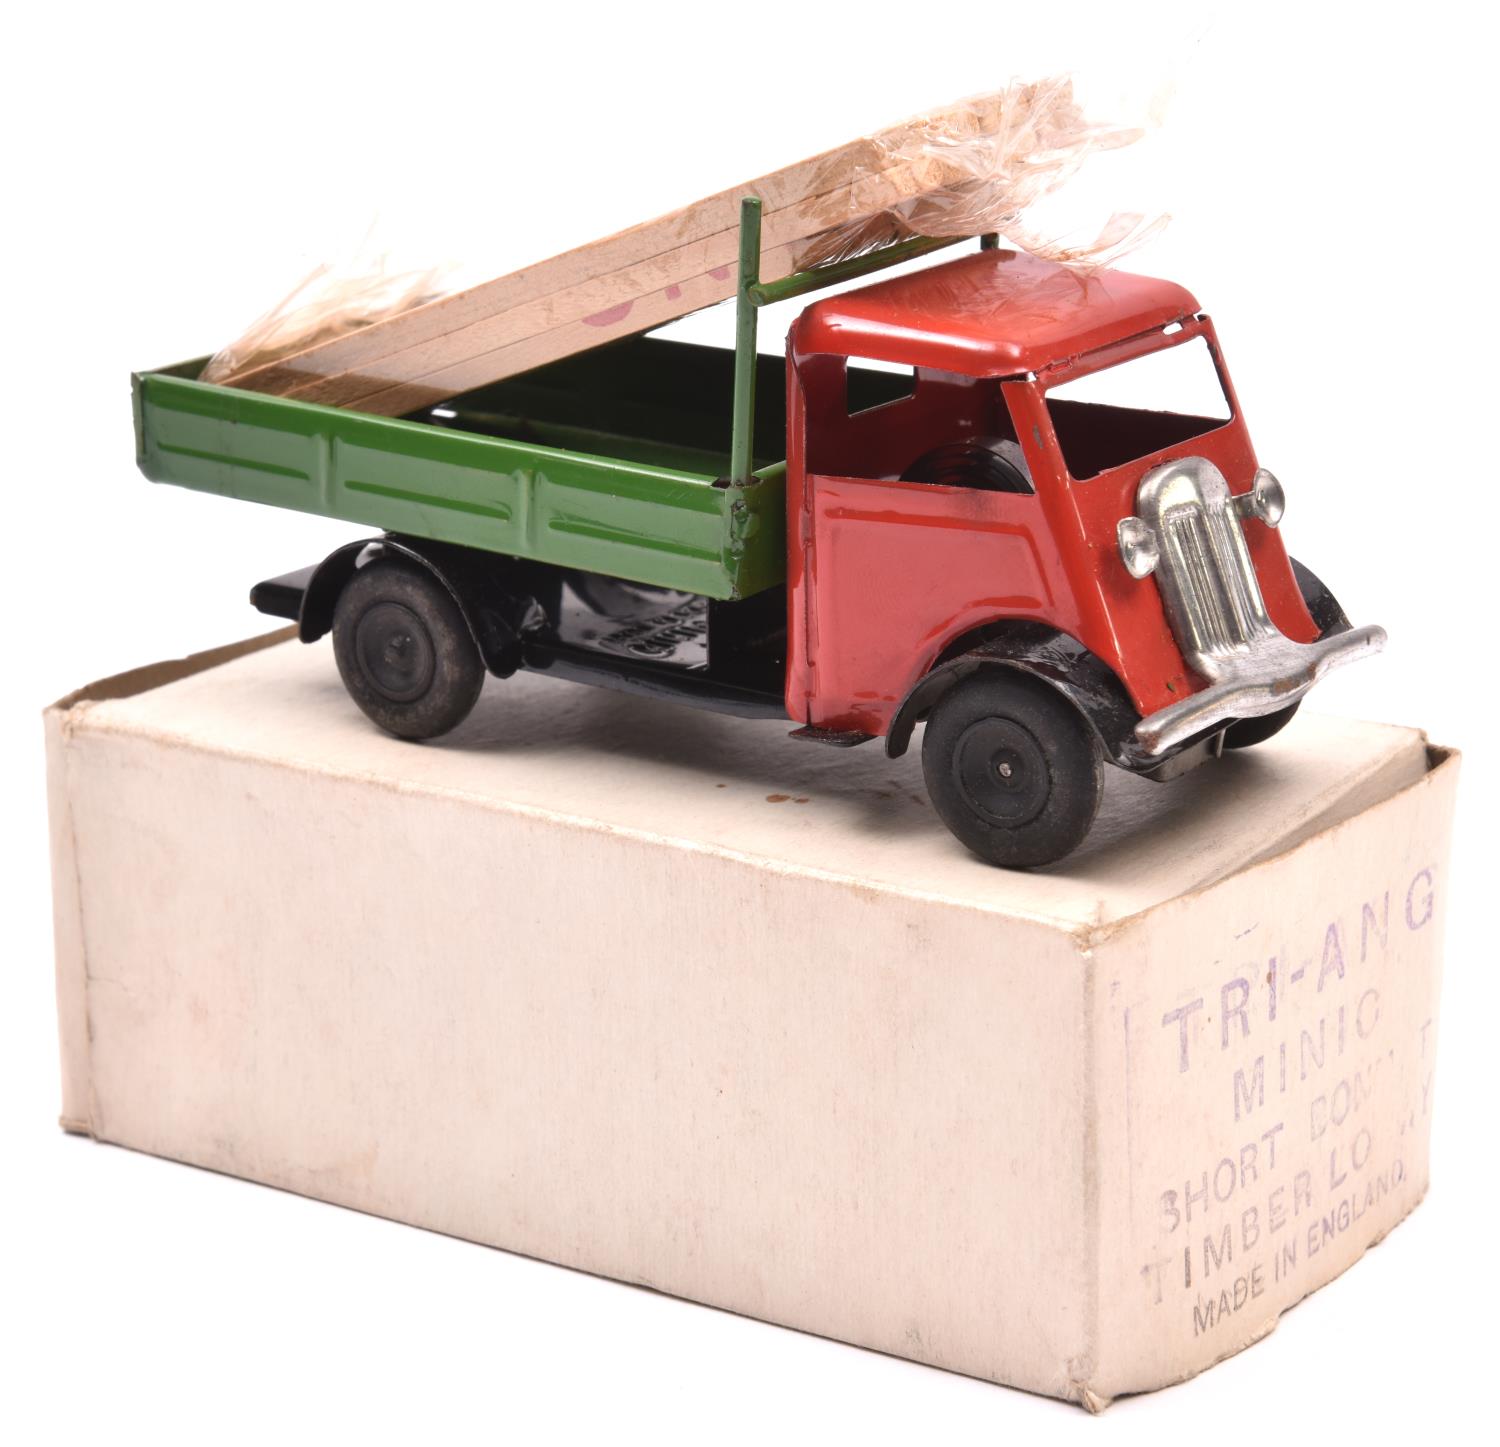 Tri-ang Minic tinplate clockwork Short Bonnet Timber Lorry No.103M. An example with red cab, green